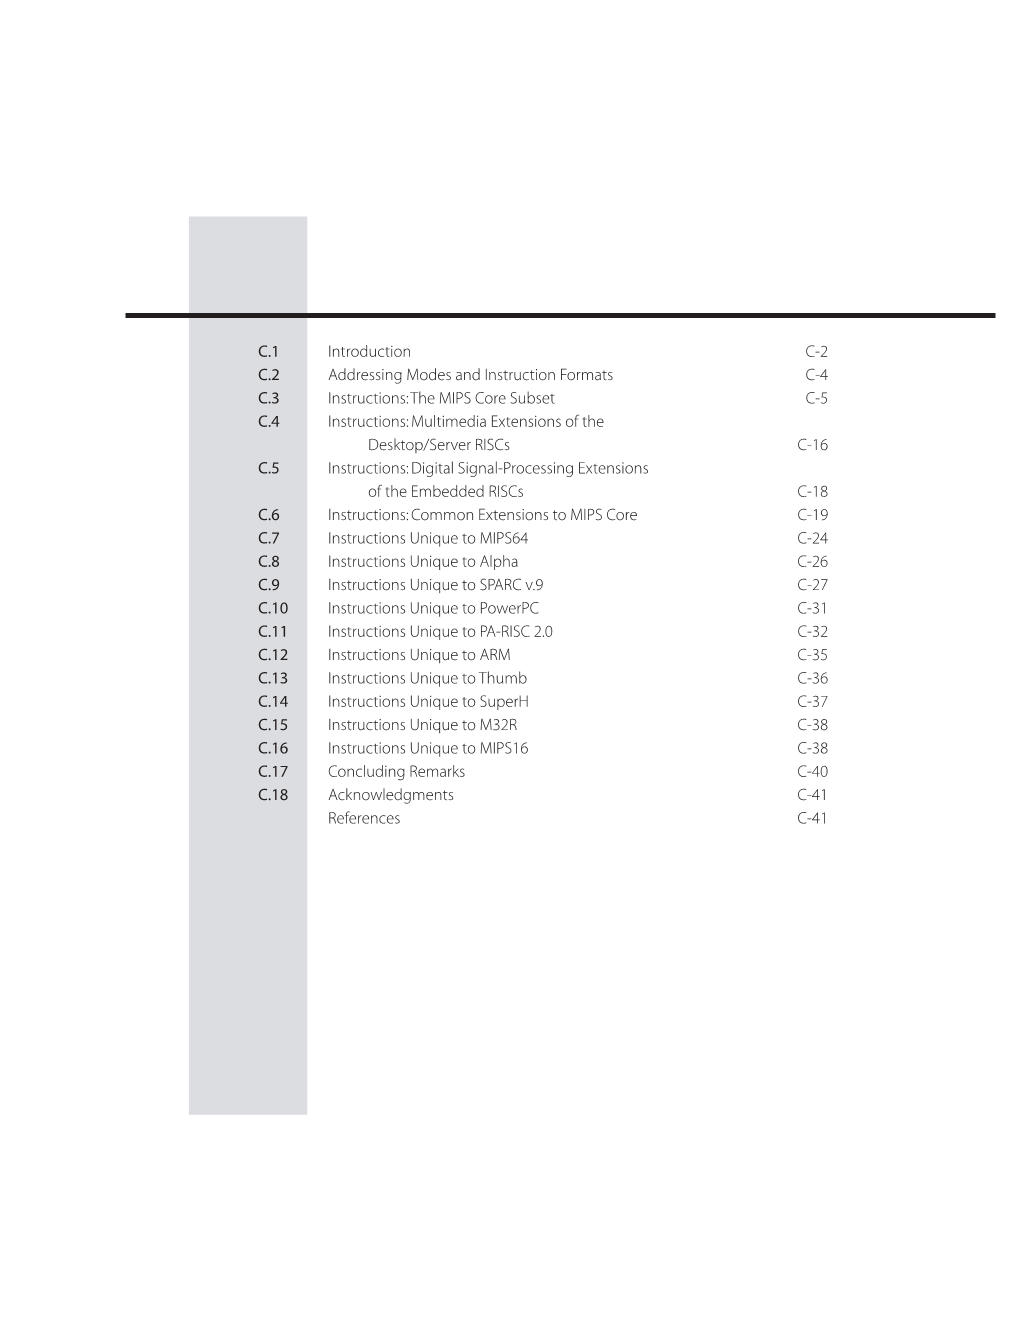 Appendix C a Survey of RISC Architectures for Desktop, Server, and Embedded Computers